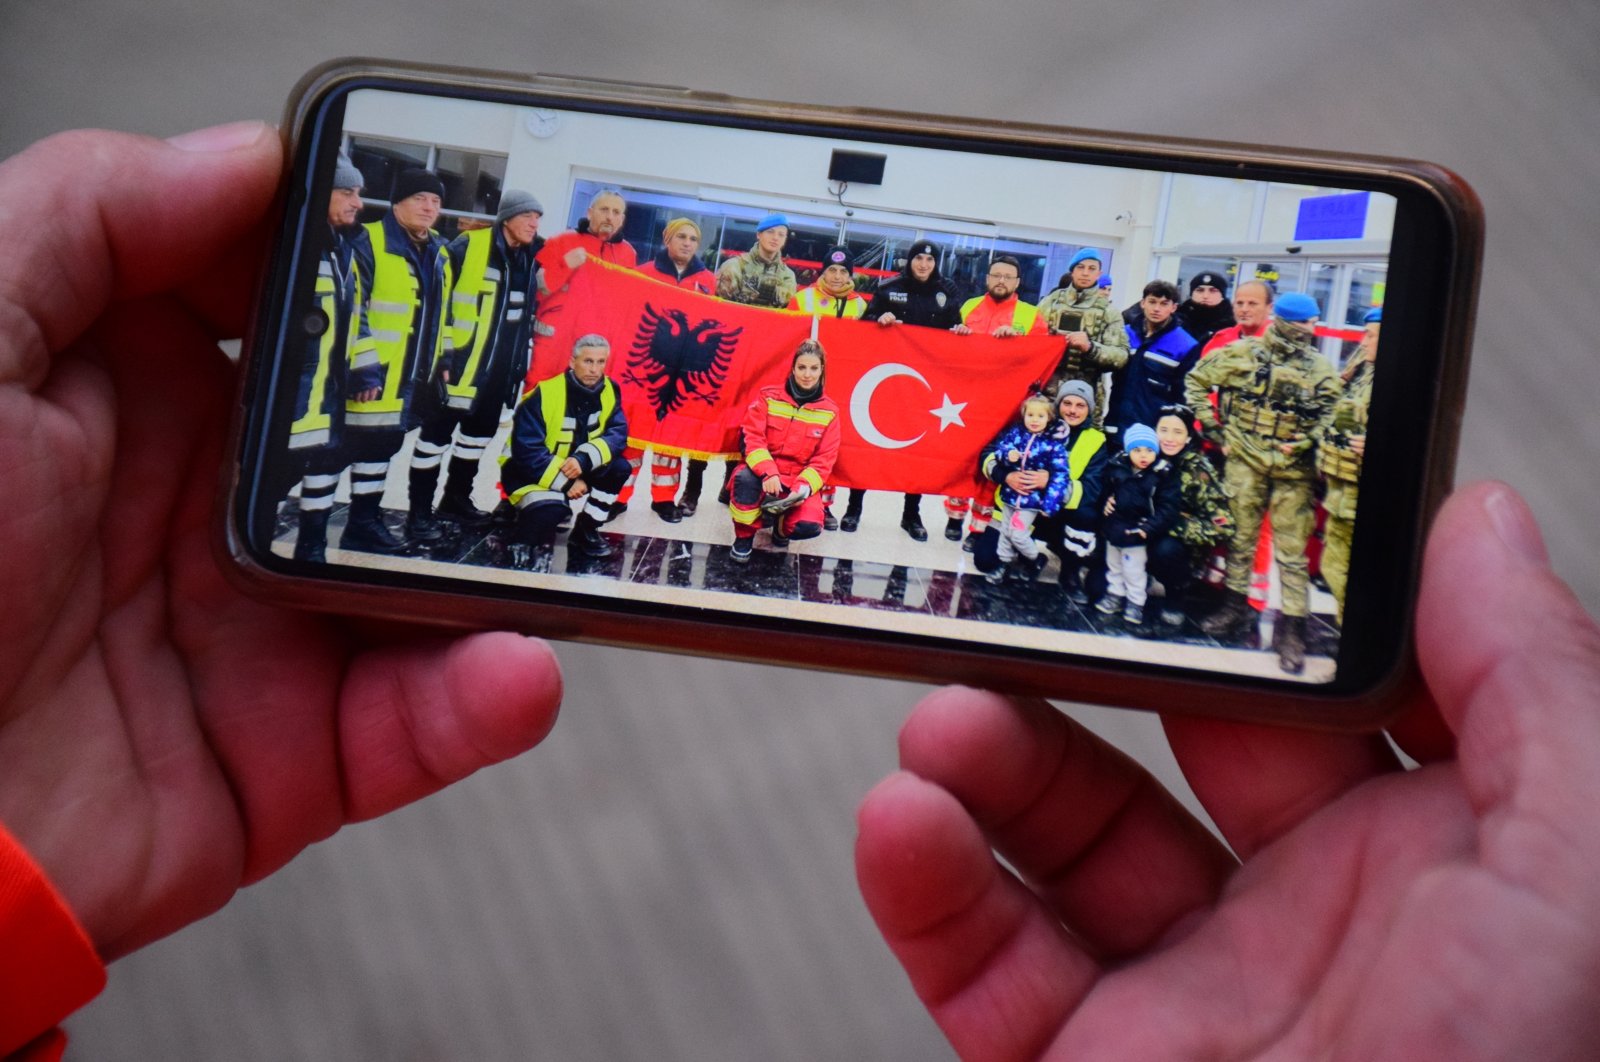 A volunteer with the Albanian rescue team shows a photo on his mobile phone ahead of their return to their country during an interview with Anadolu Agency (AA) recounting the team&#039;s experience in earthquake-stricken Türkiye, Feb. 15, 2023. (AA Photo)